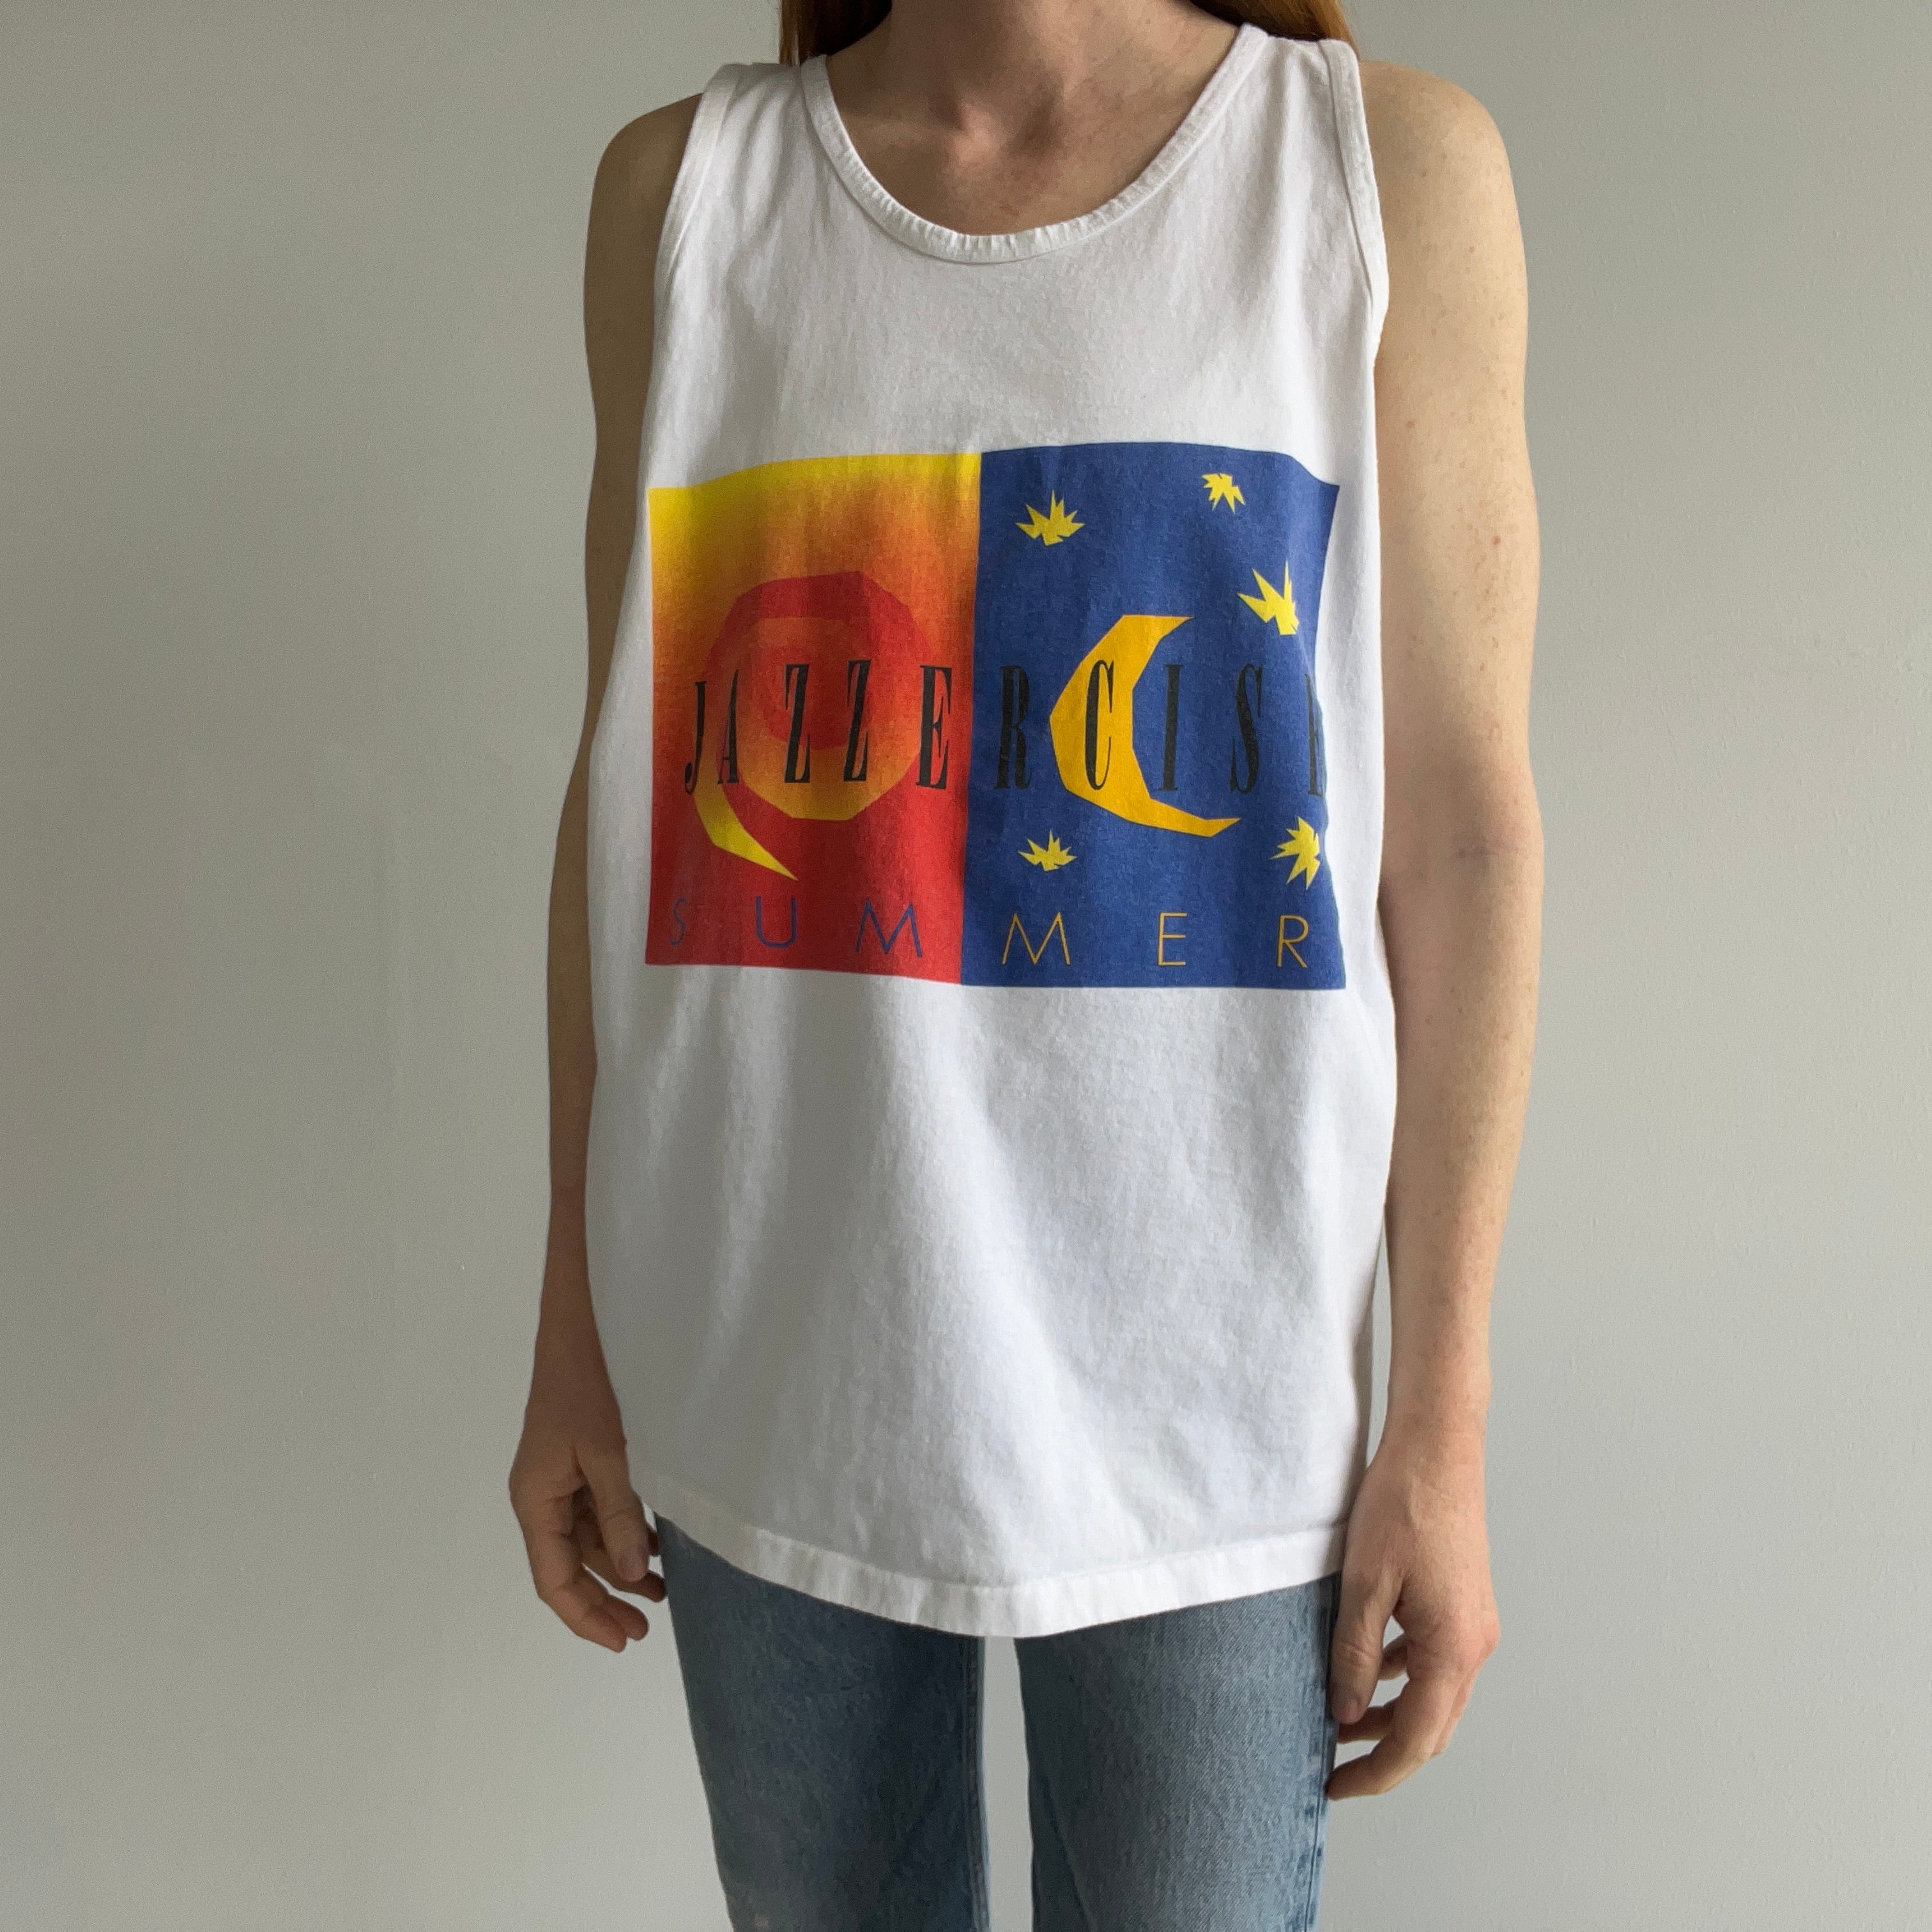 1980/90s Jazzercise Summer Tank Top - YES!